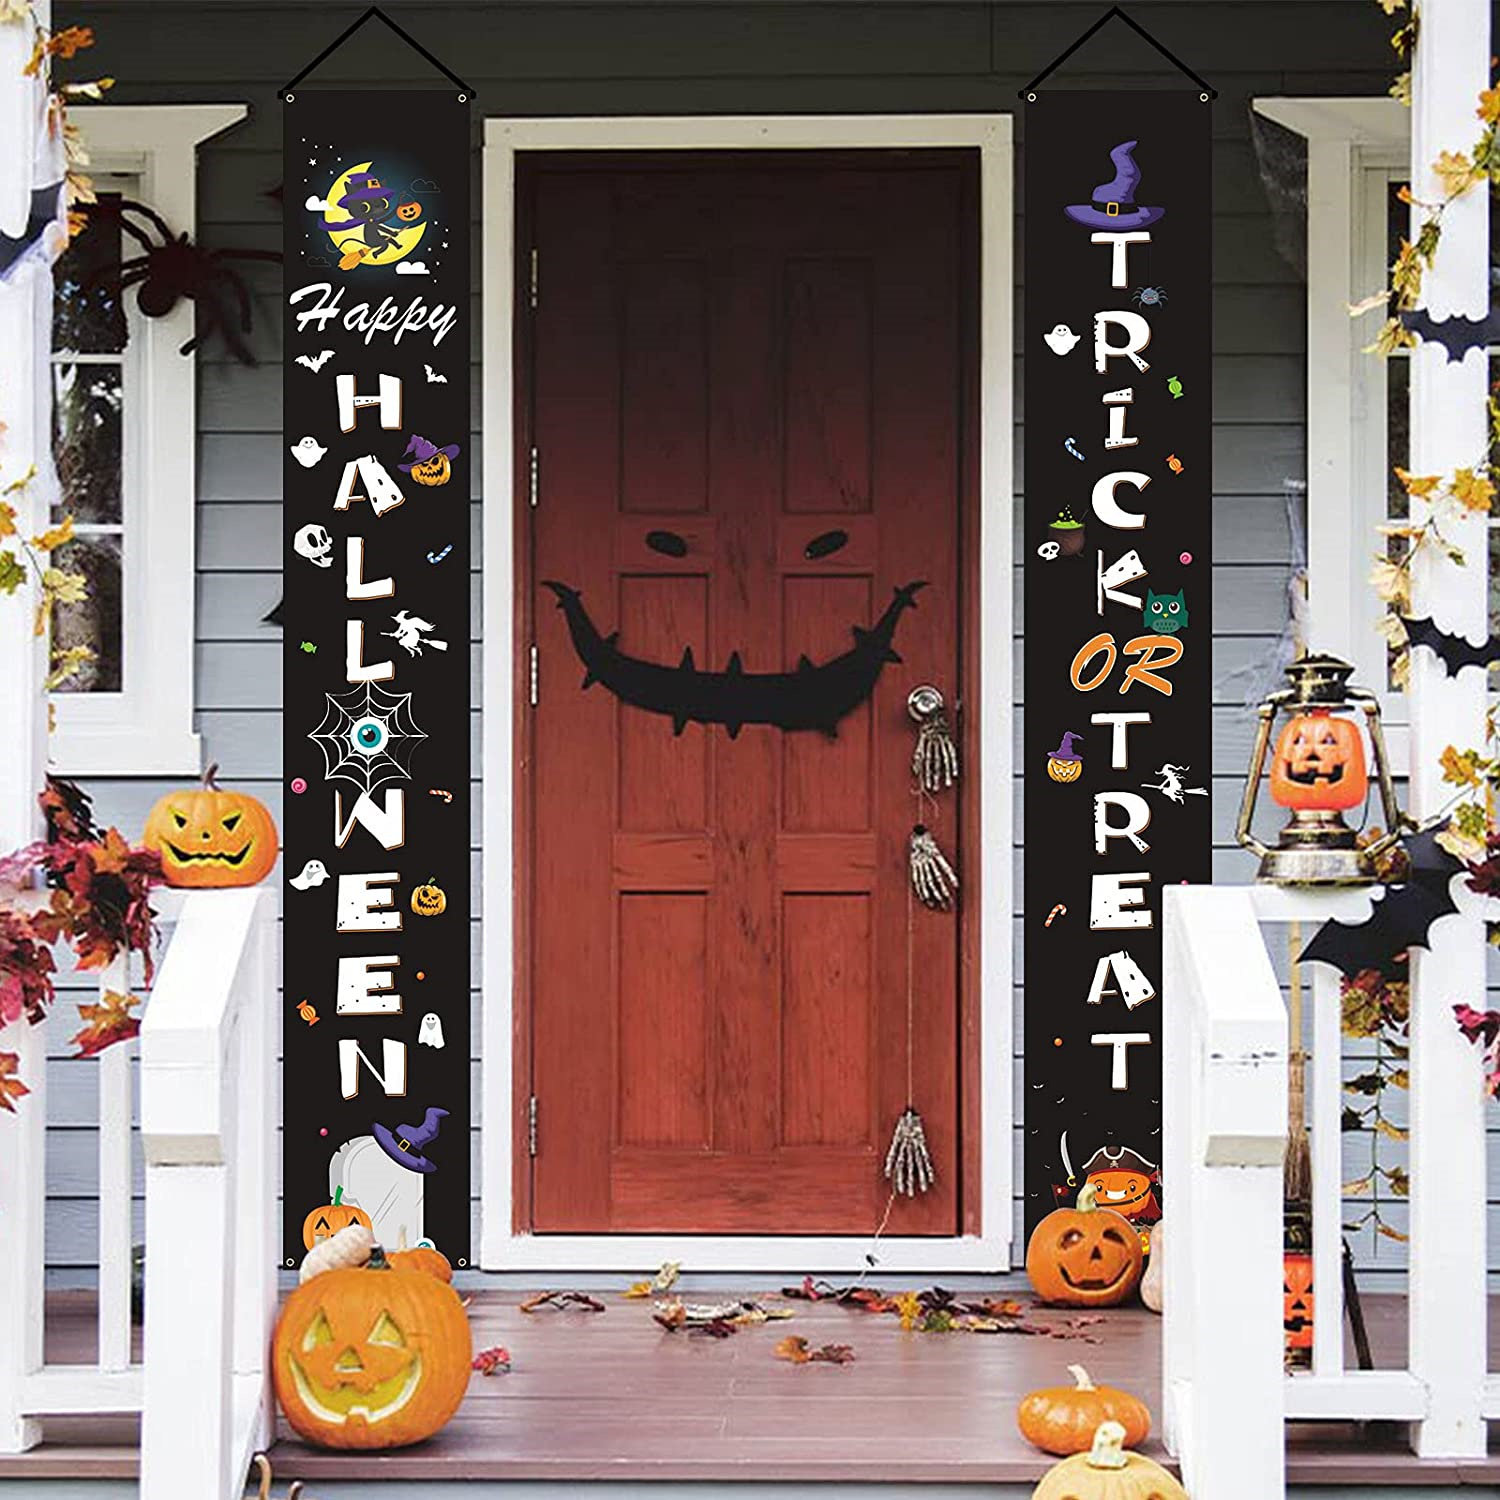 Halloween Porch Banner Decor for Home Wall Front Door Yard House Fireplace Indoor Outdoor Decoration Halloween Decorations Outdoor Door Sign Trick or Treat Hanging Welcome Signs for Halloween Party 